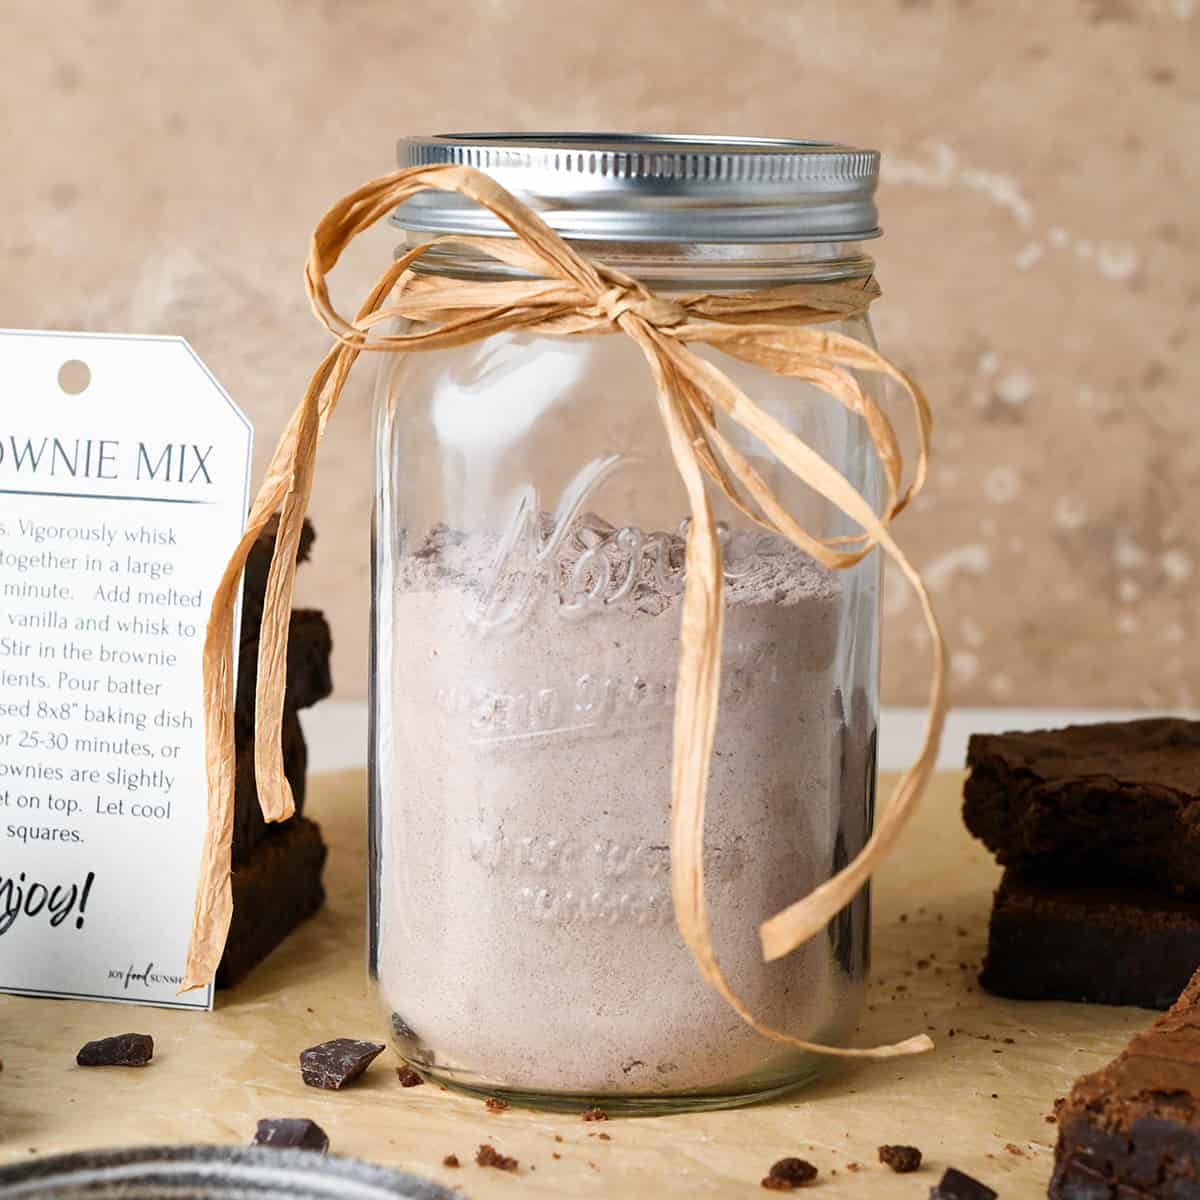 Homemade Brownie Mix in a glass jar with a bow